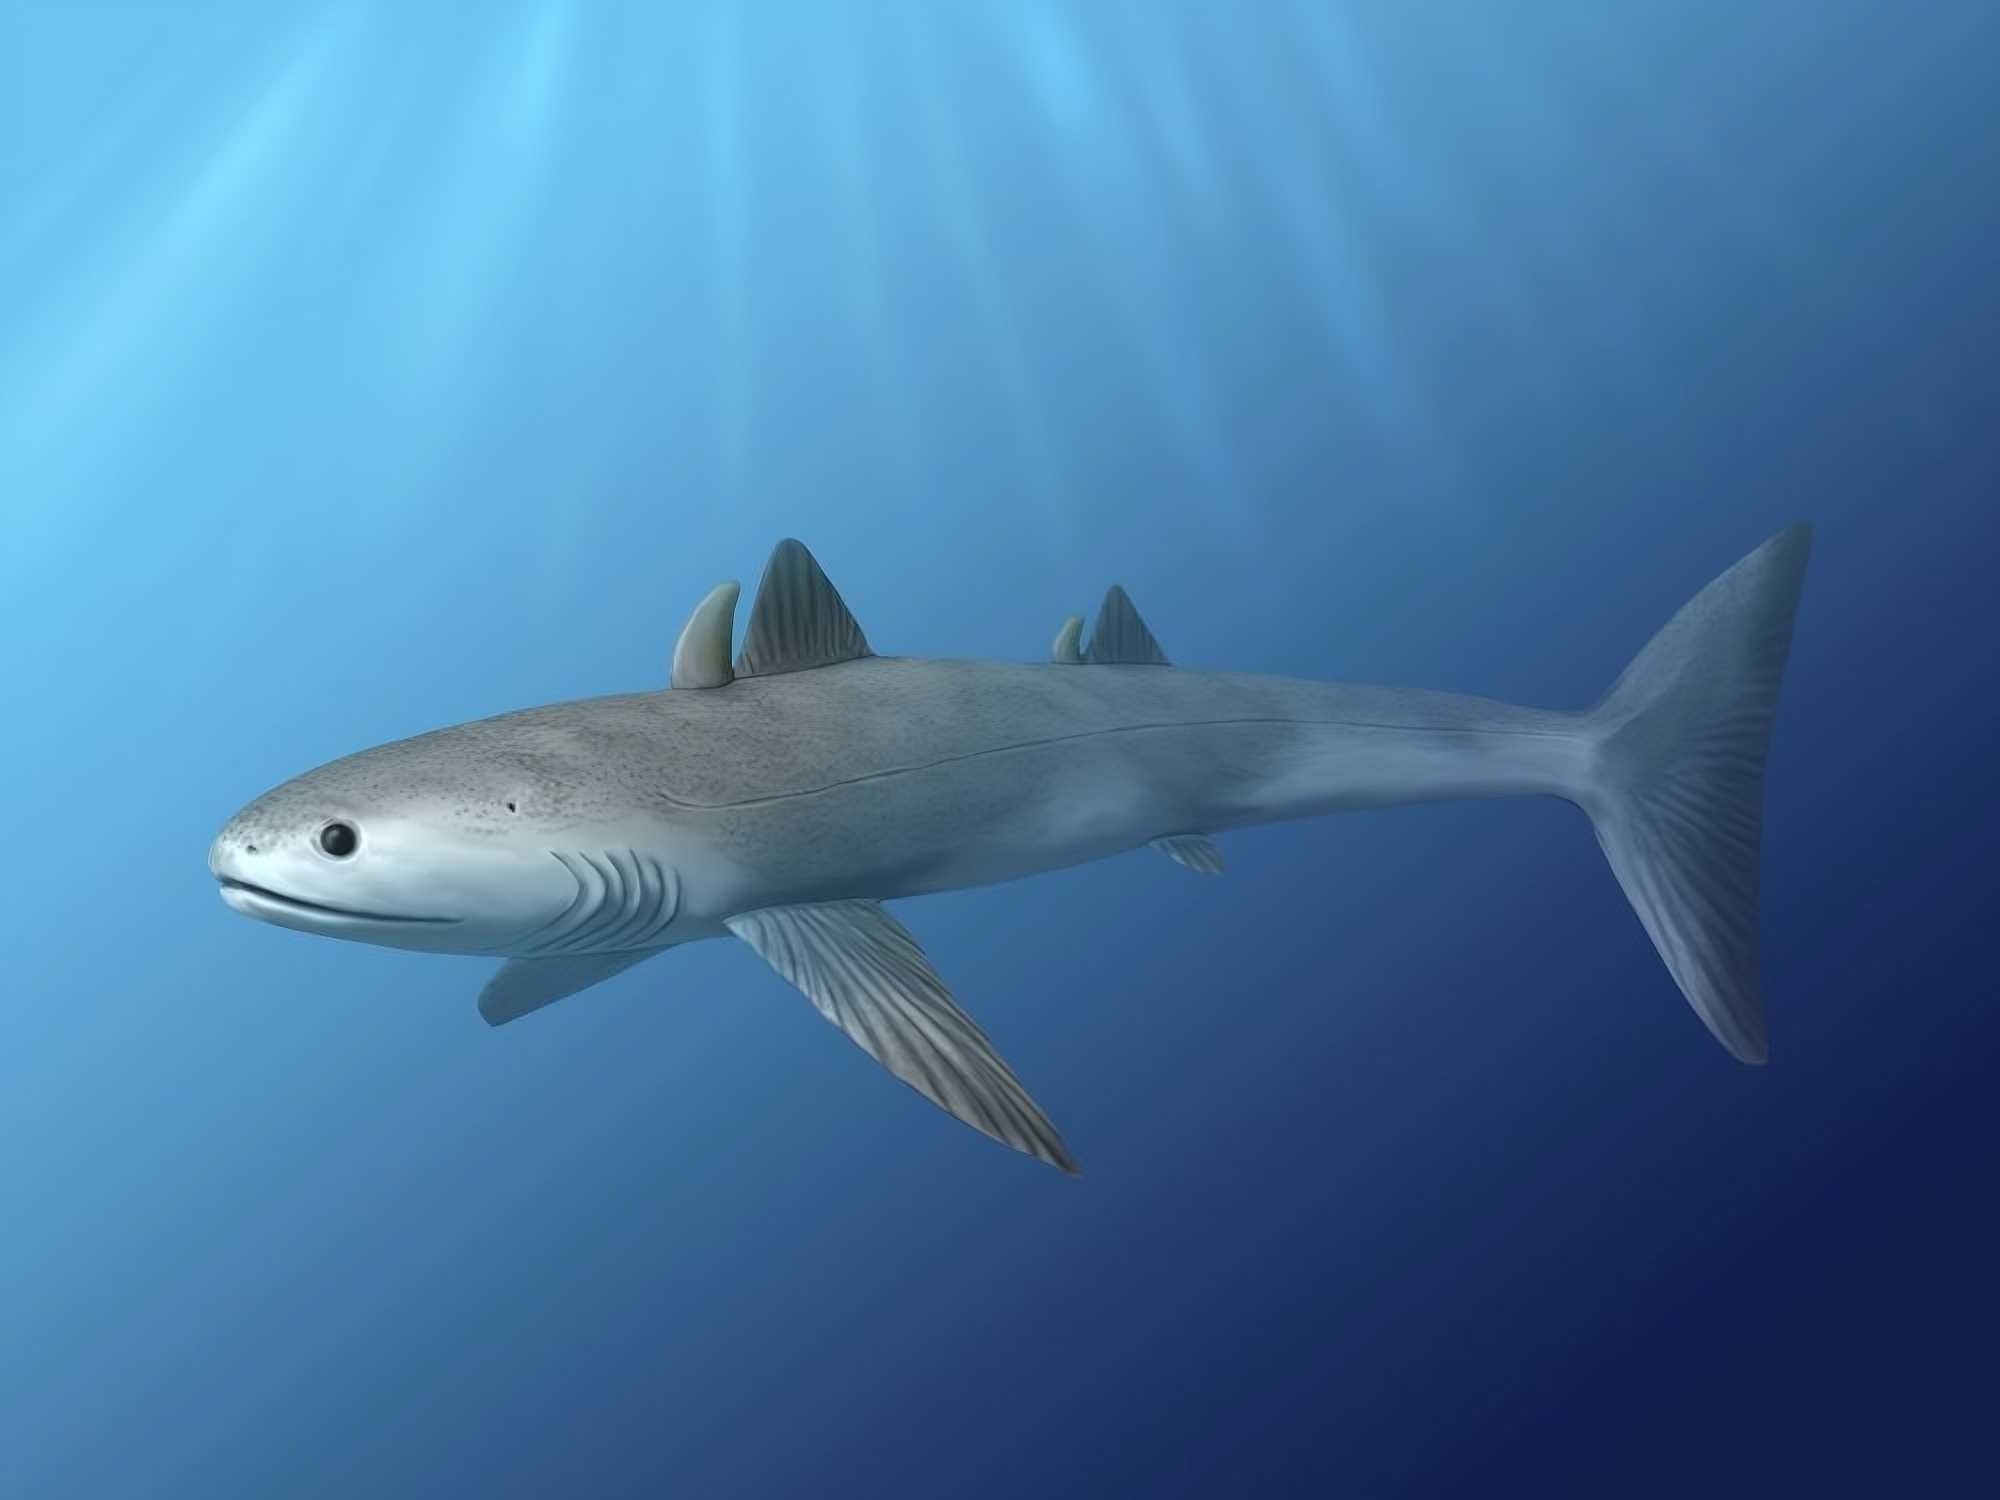 The first shark-like animal is Cladoselache.